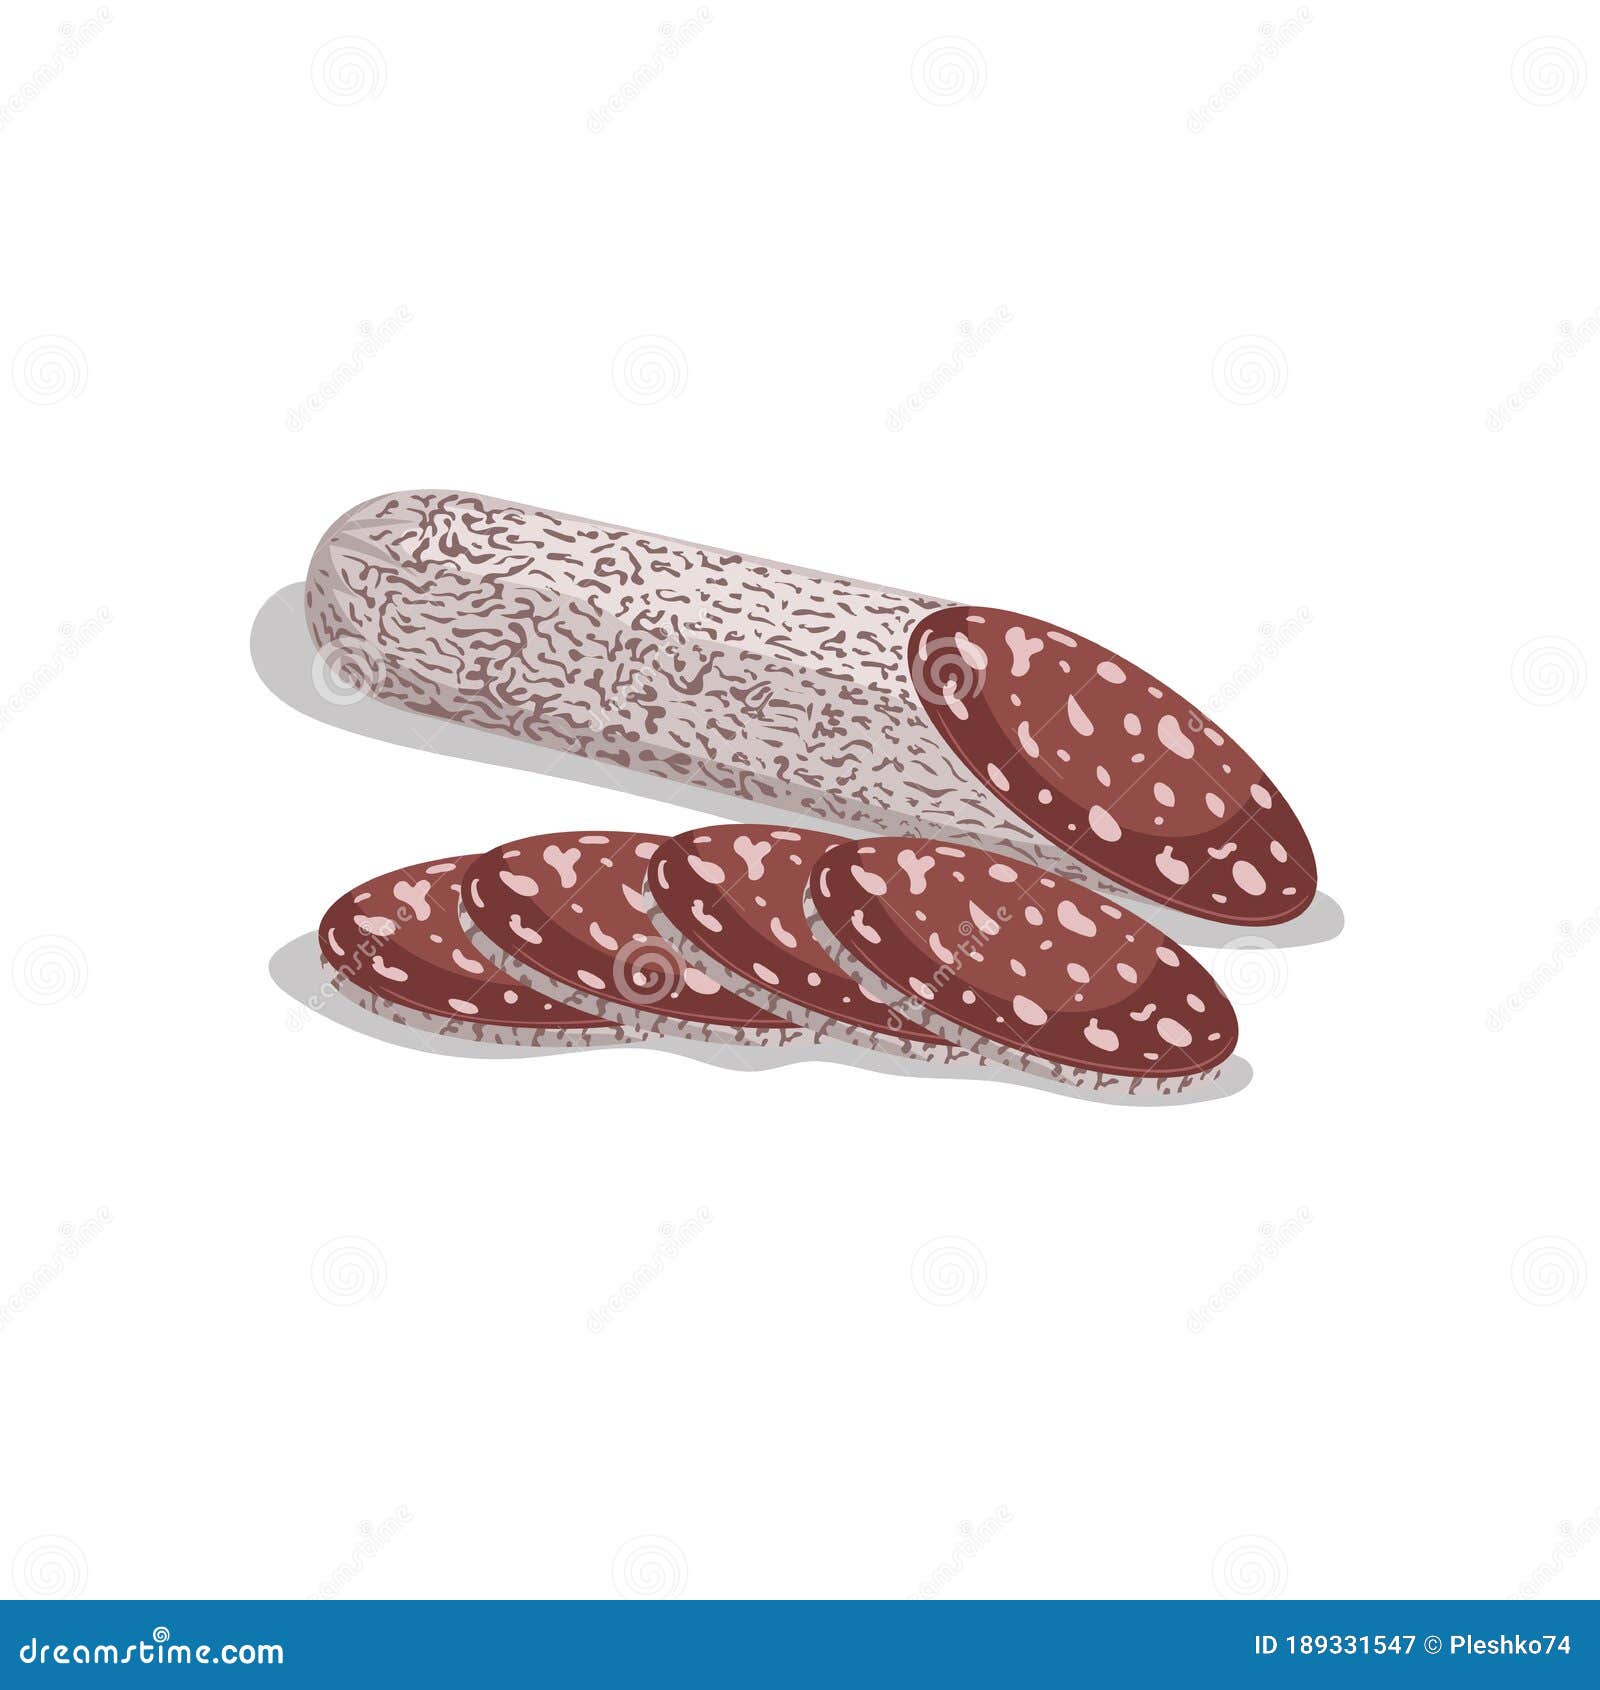 cartoon flat style dry cured salami with slices. italian or mediterranian meat product in bright layered cover.  illustratio